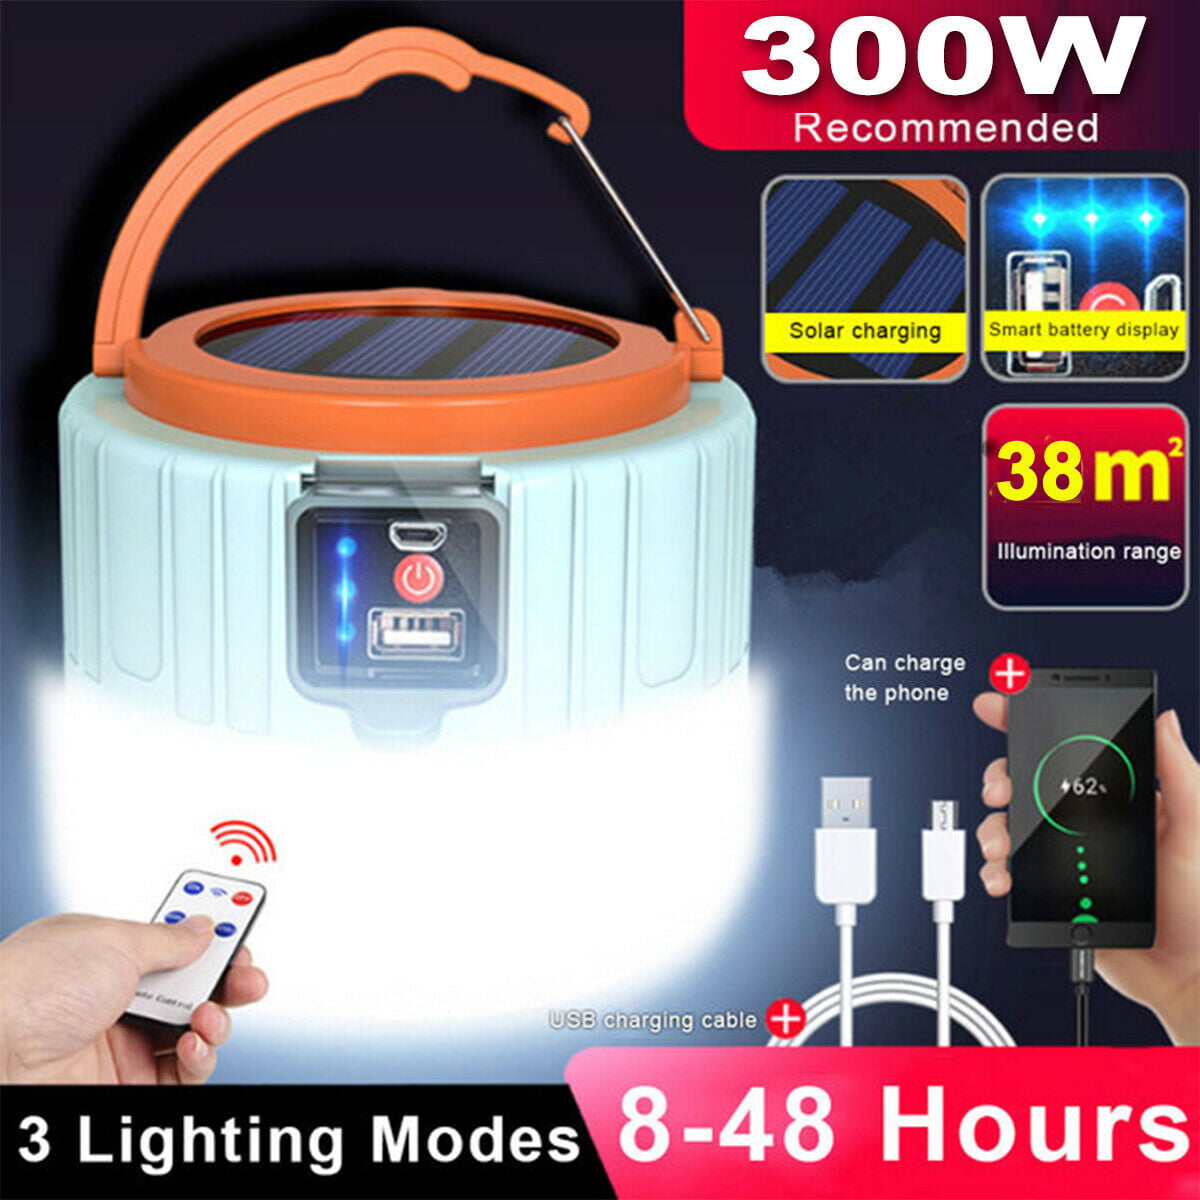 Remote Control Solar LED Camping Lantern USB Rechargeable Light Bulb Tent Light